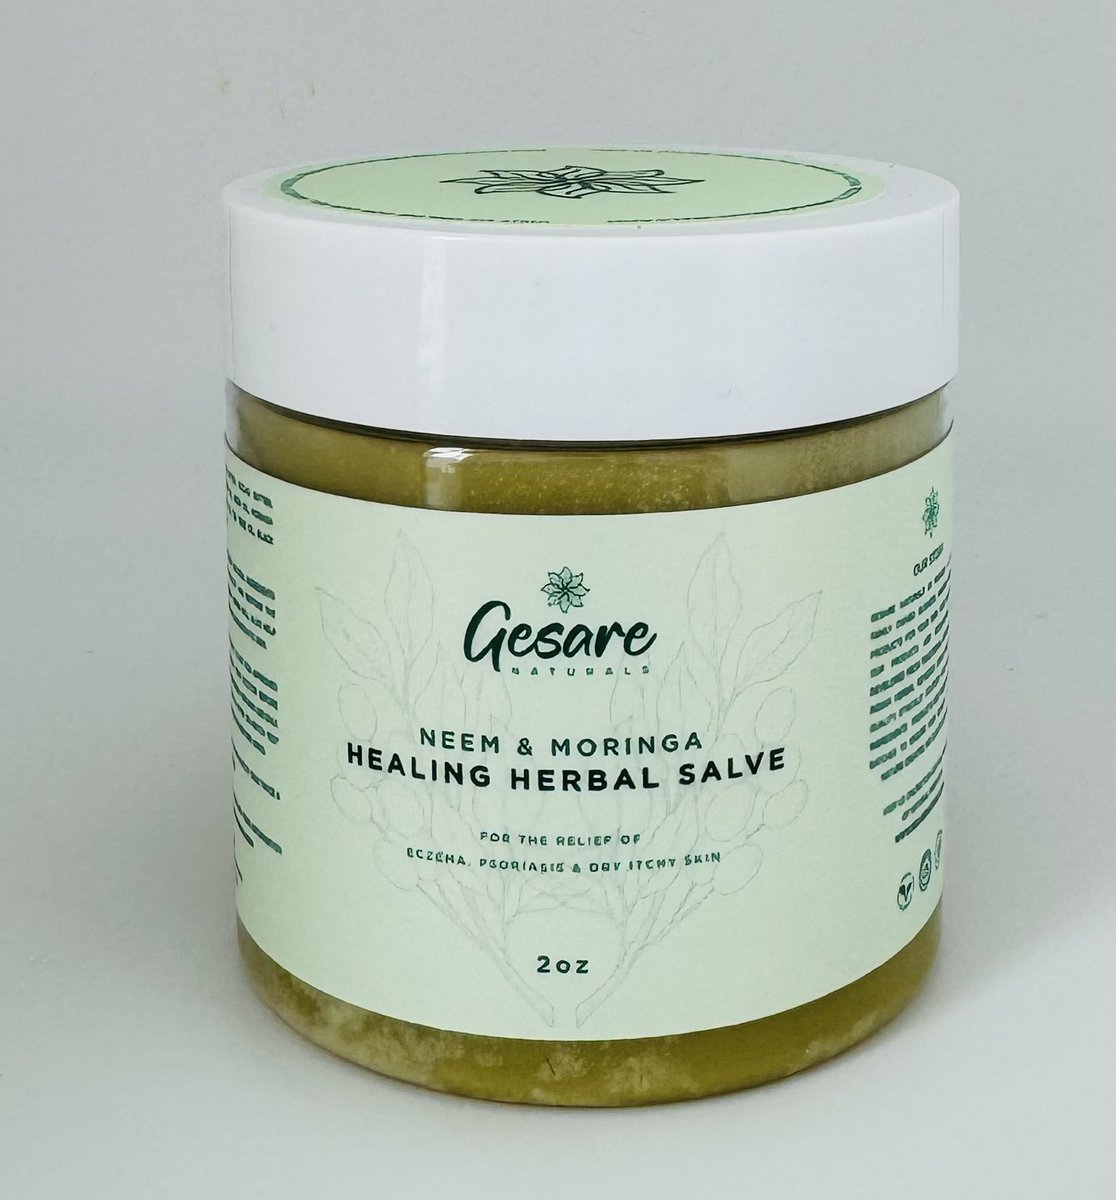 My Herbal Healing salve is made from collection of oils infused with Moringa. It helps with Eczema, Psoriasis & dry itchy skin. See pics for results of lady suffering from Eczema for 3+ years & her after on my salve. (graphic pics) Available in US only at gesarenaturals.com